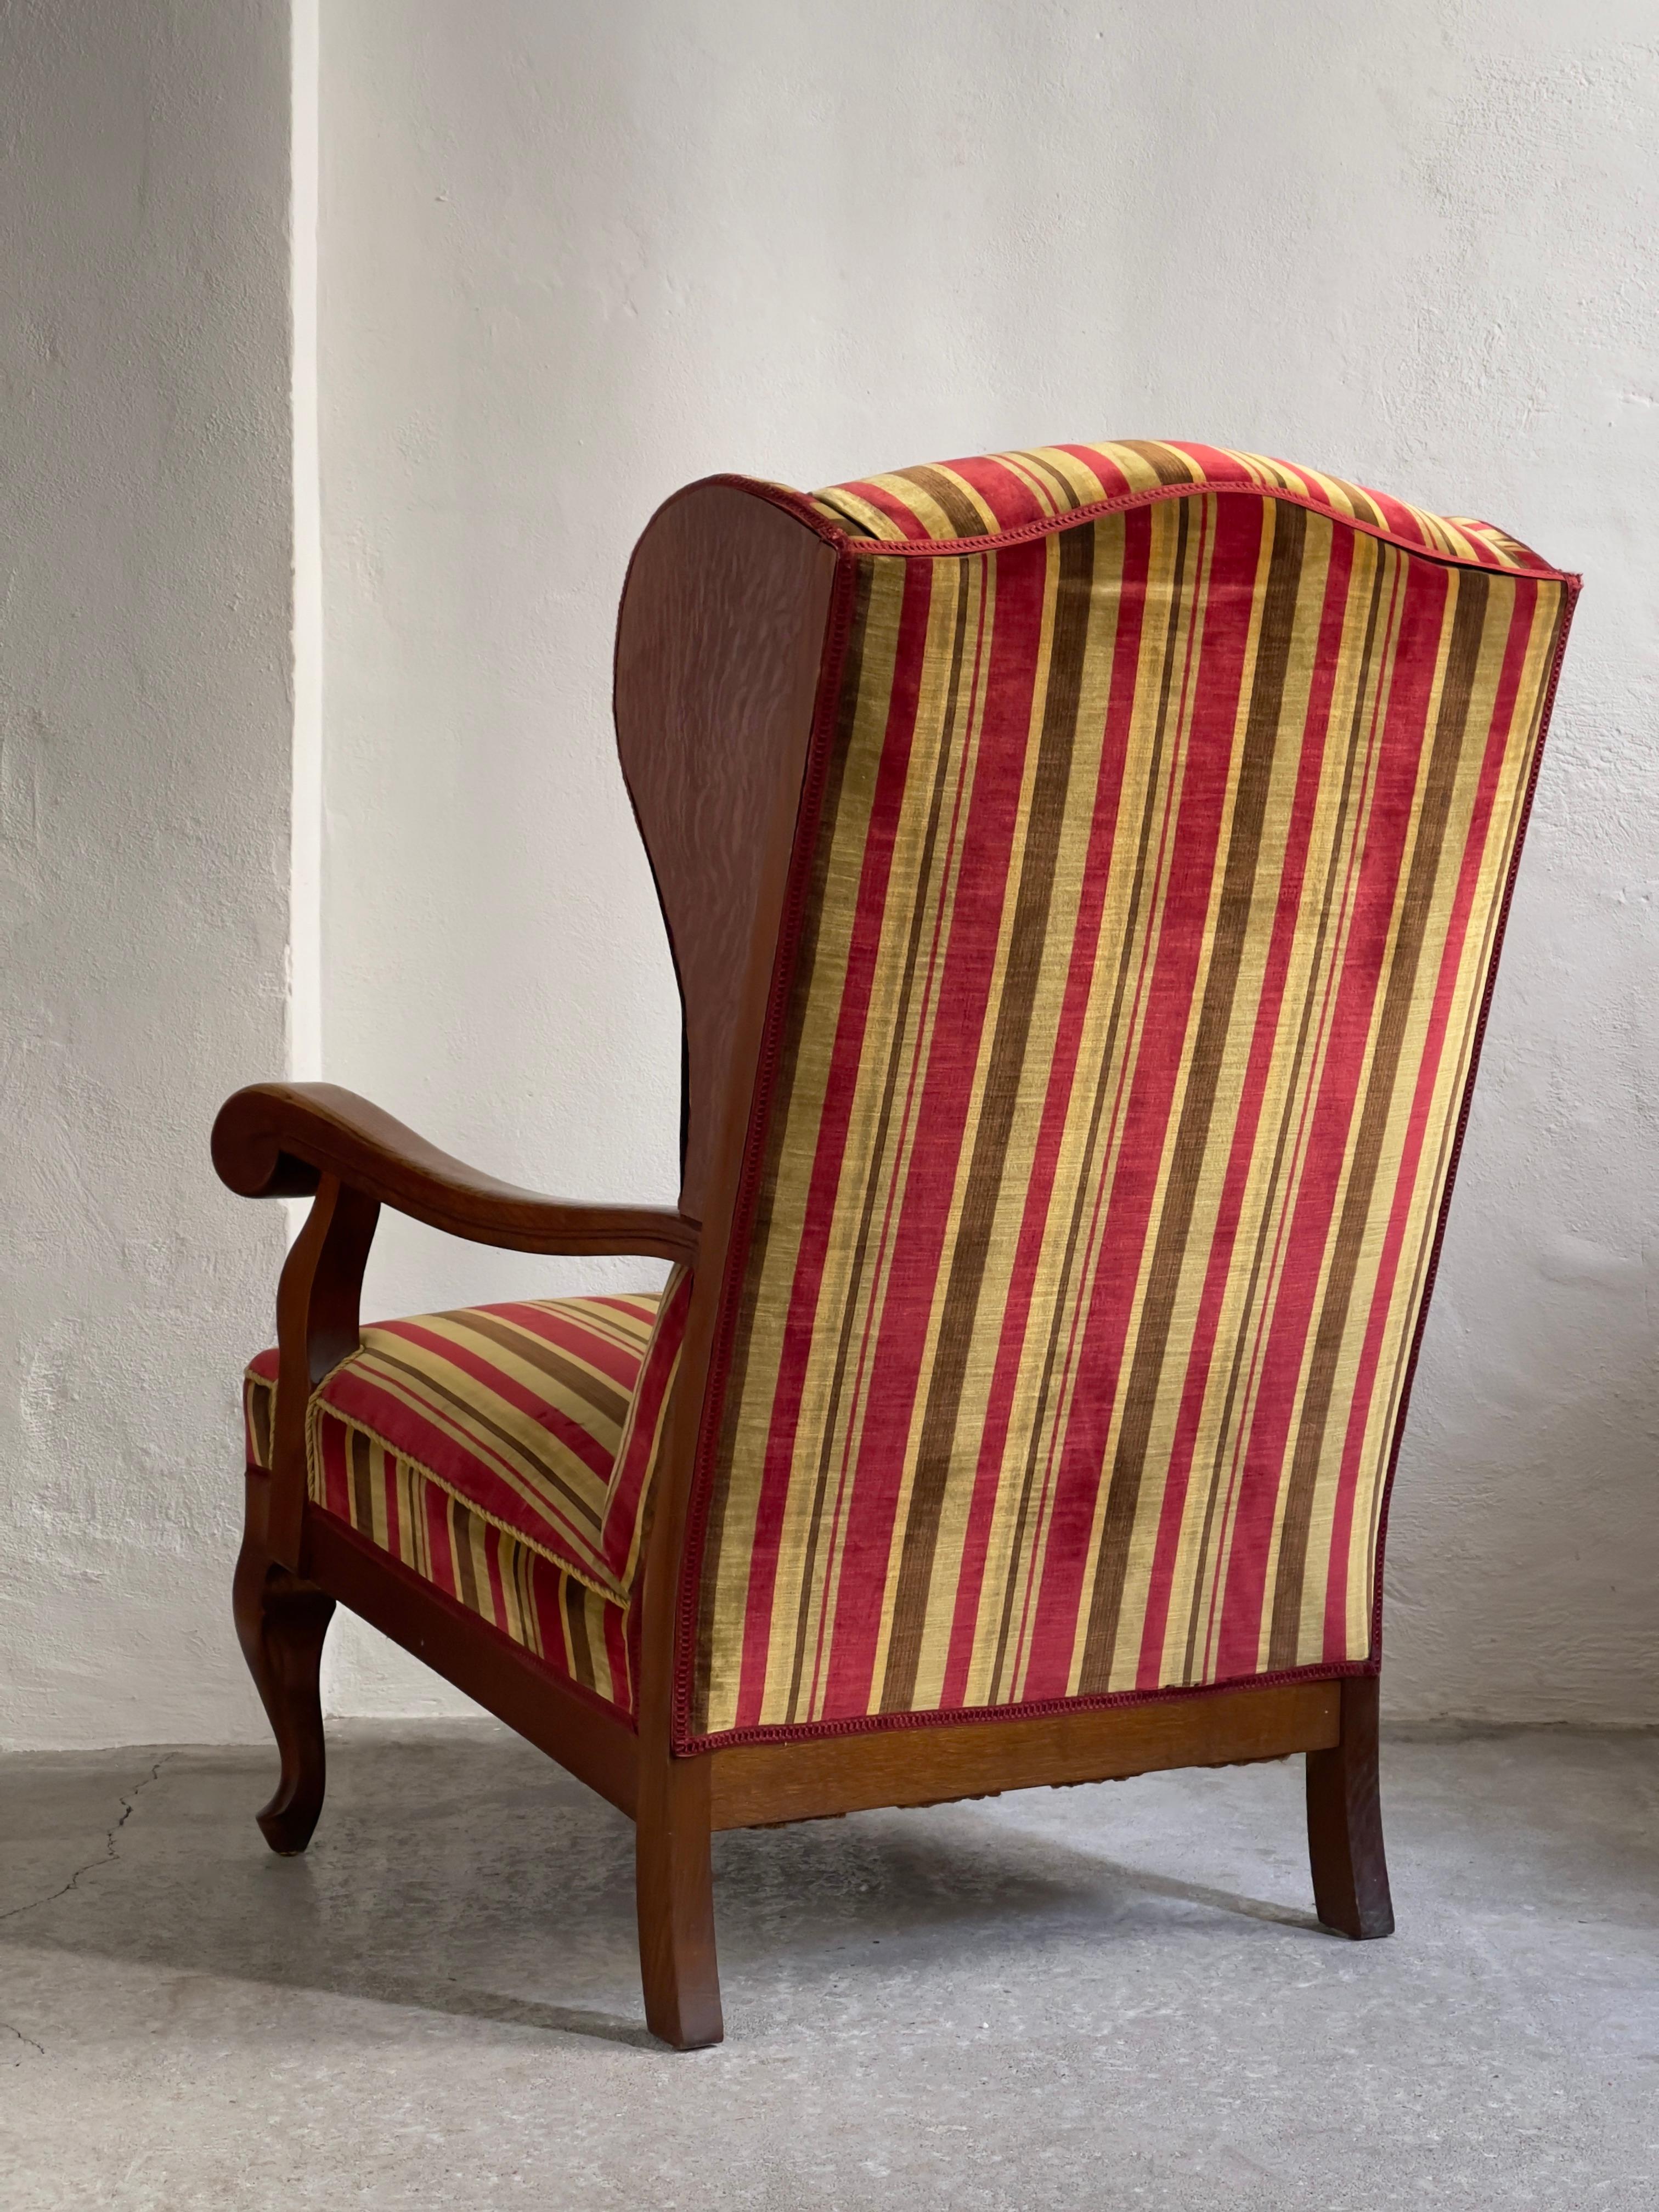 1930s Danish Modern Lounge Chair in Solid Oak and Striped Velvet Upholstery  For Sale 3